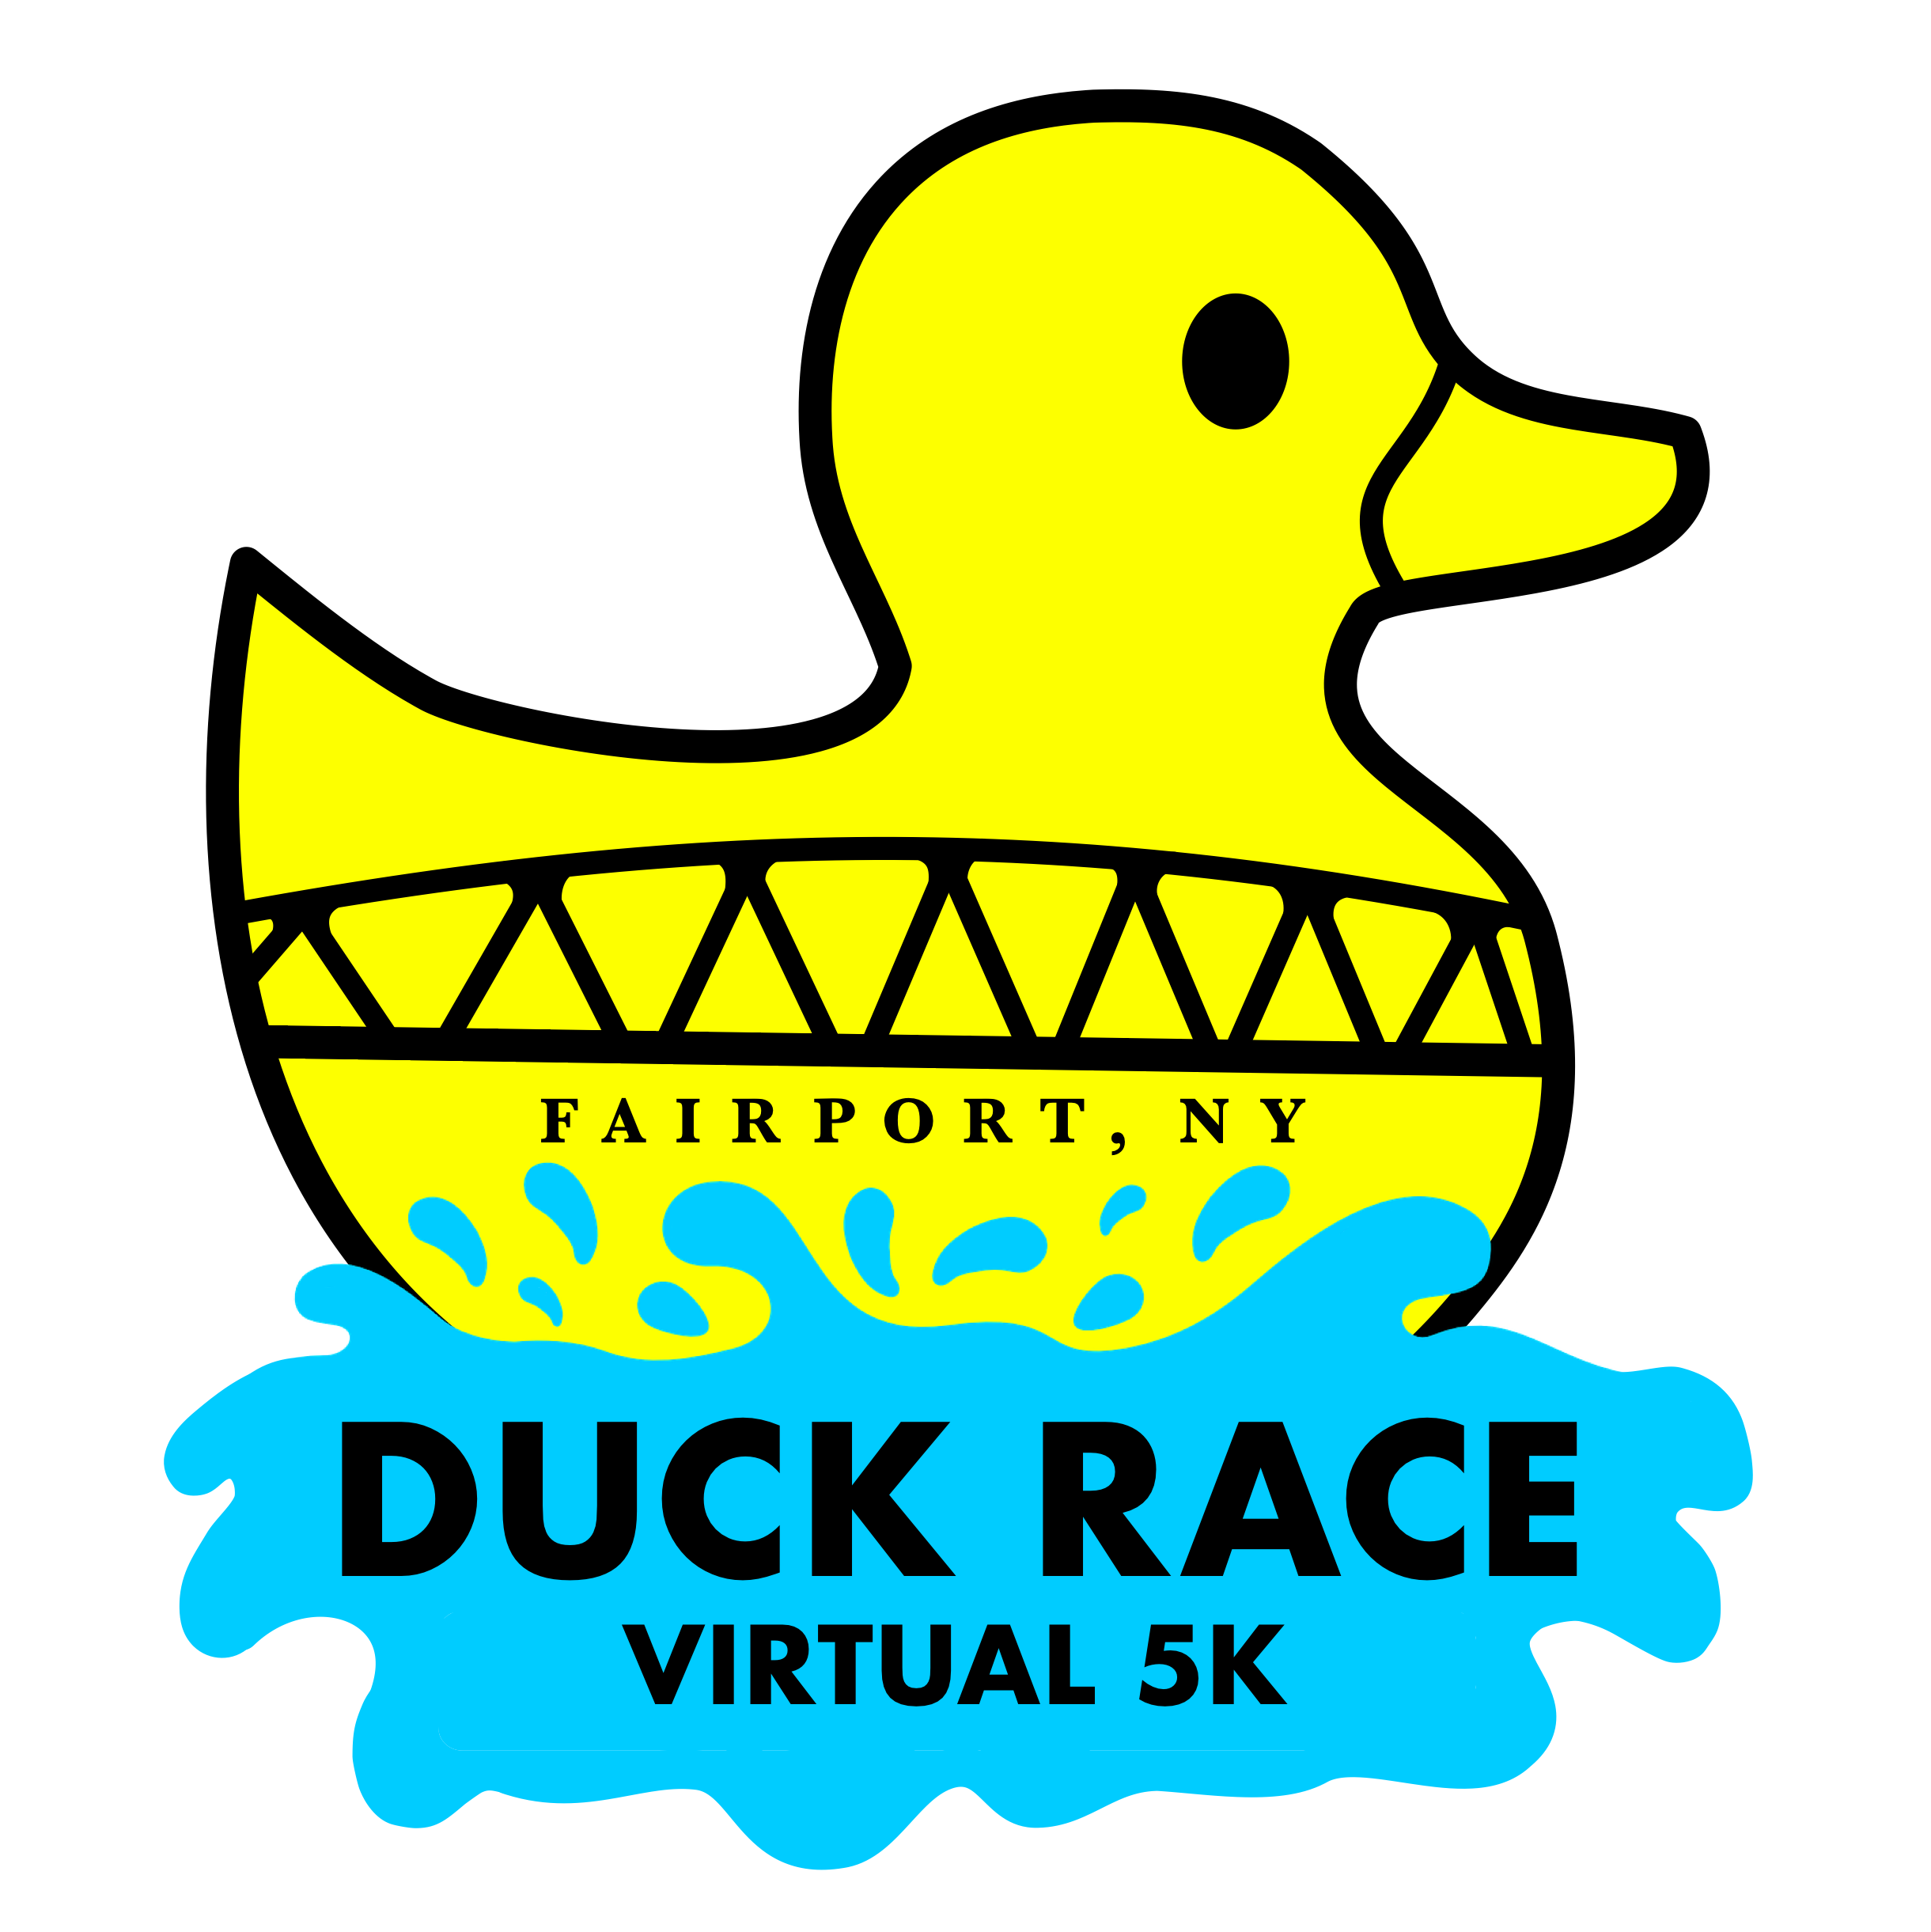 2021 Fairport Virtual 5K Duck Race in Fairport , NY - Details